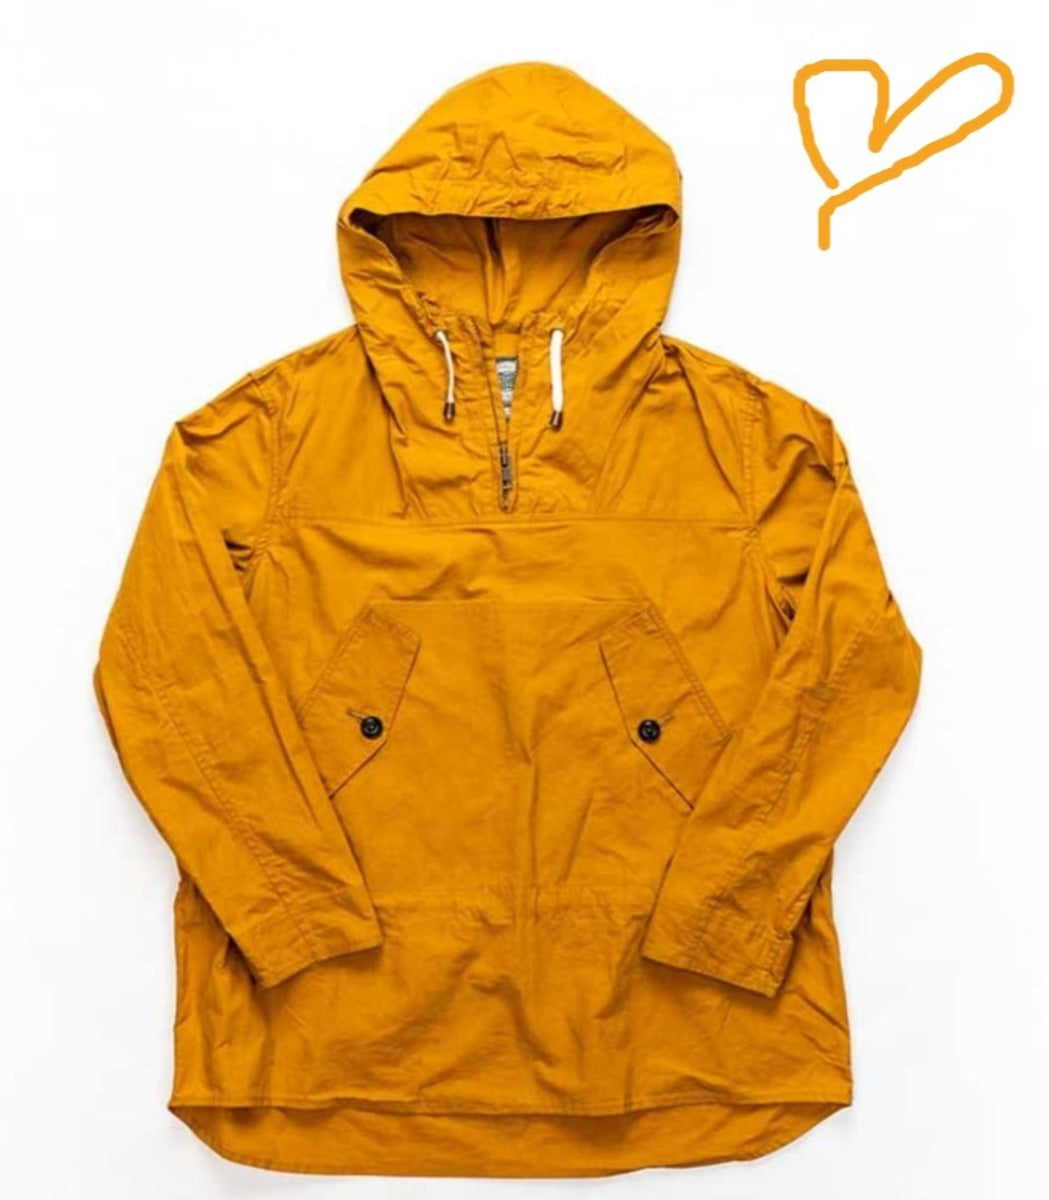 Mustard hooded smock by Yarmouth Oilskins. Wax finish and water repellent